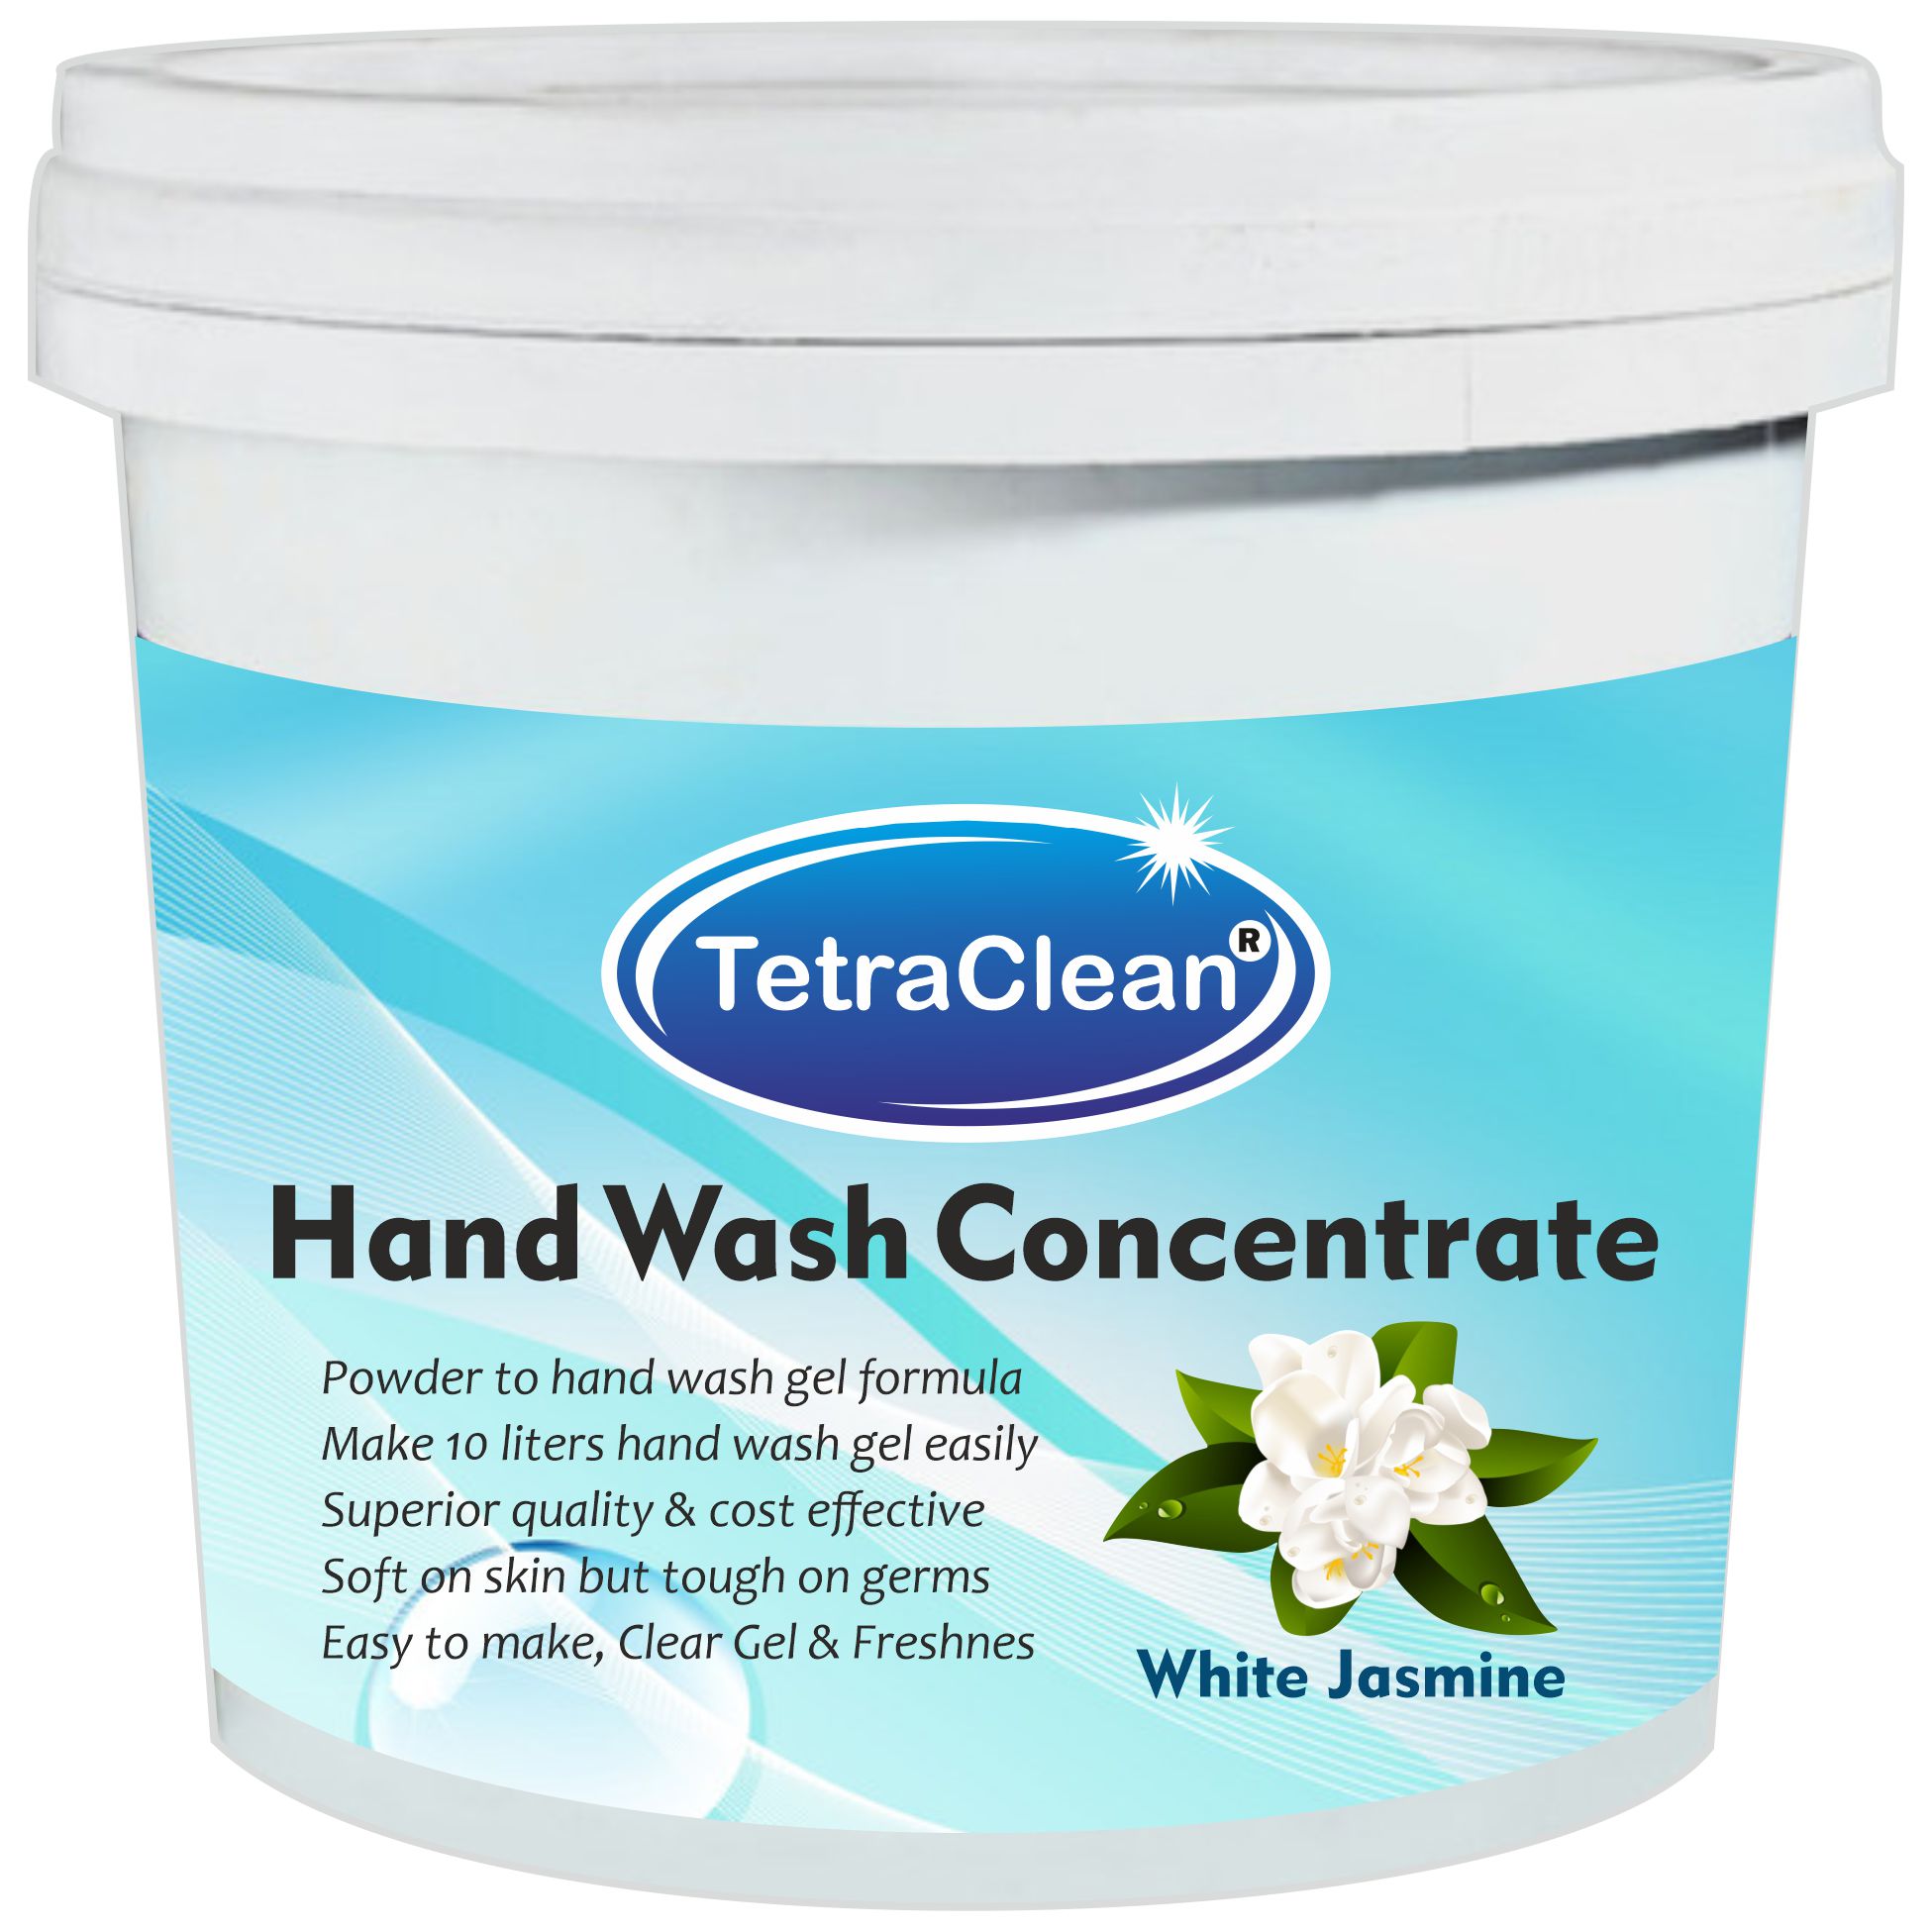 TetraClean Hand Wash Concentrate Powder - 500gm packing - with jasmine fragrance